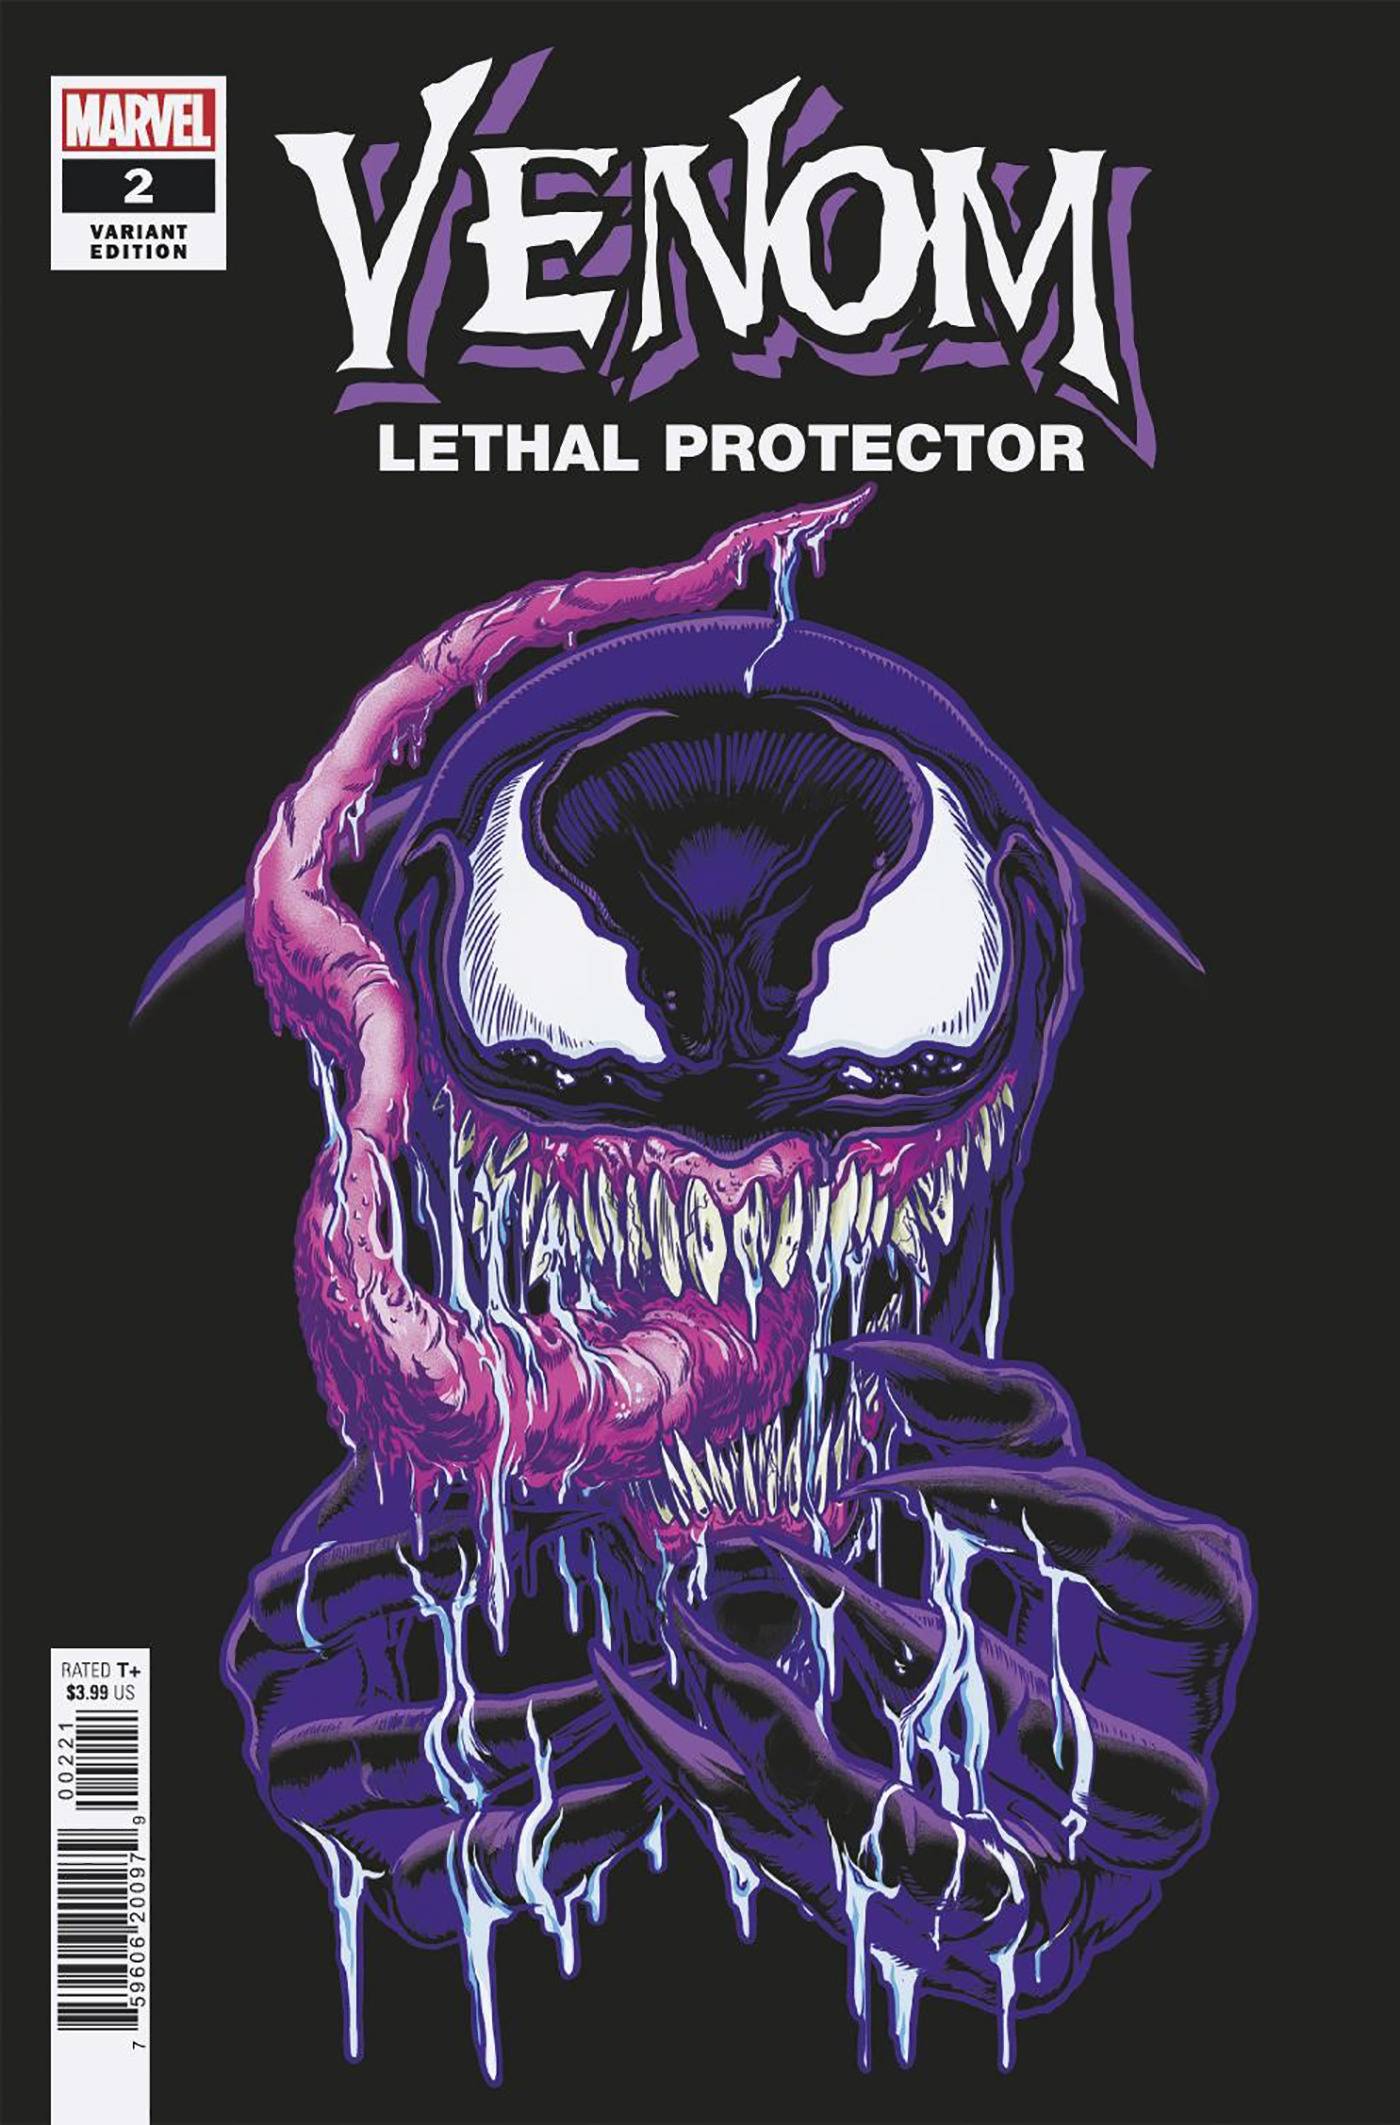 05/18/2022 VENOM LETHAL PROTECTOR #2 (OF 5) SCARECROWOVEN VARIANT